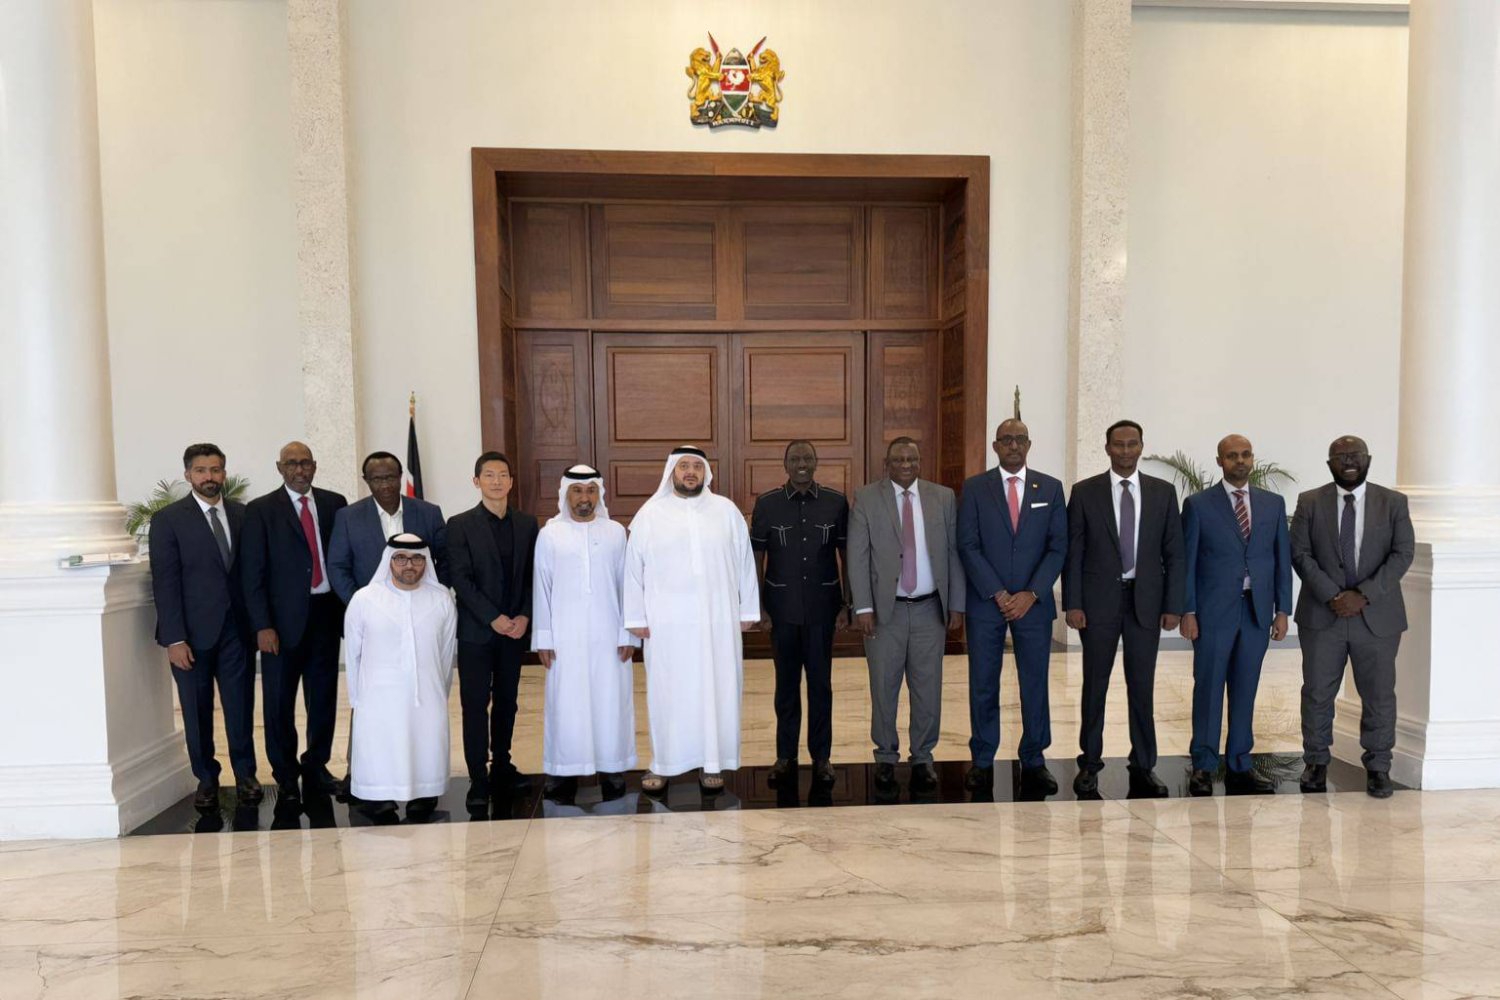 The UAE and Kenya signed a memorandum of understanding, setting the stage for investment collaboration in mining and technology sectors. WAM